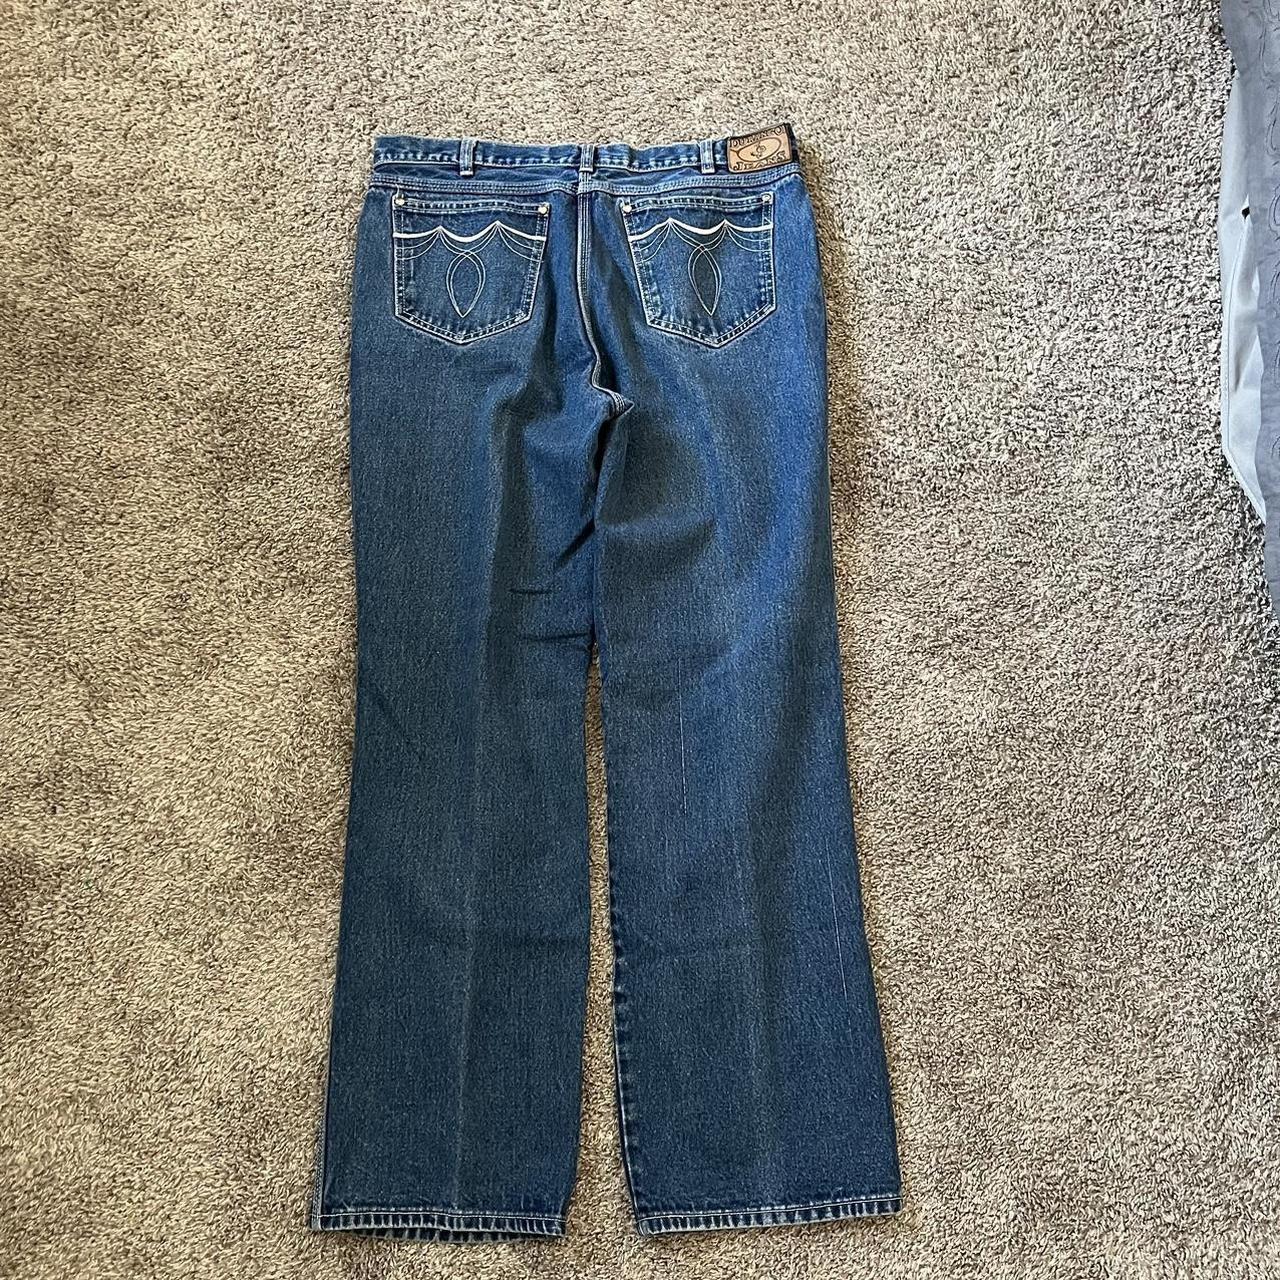 Insane pair of y2k embroidered jeans, really nice... - Depop